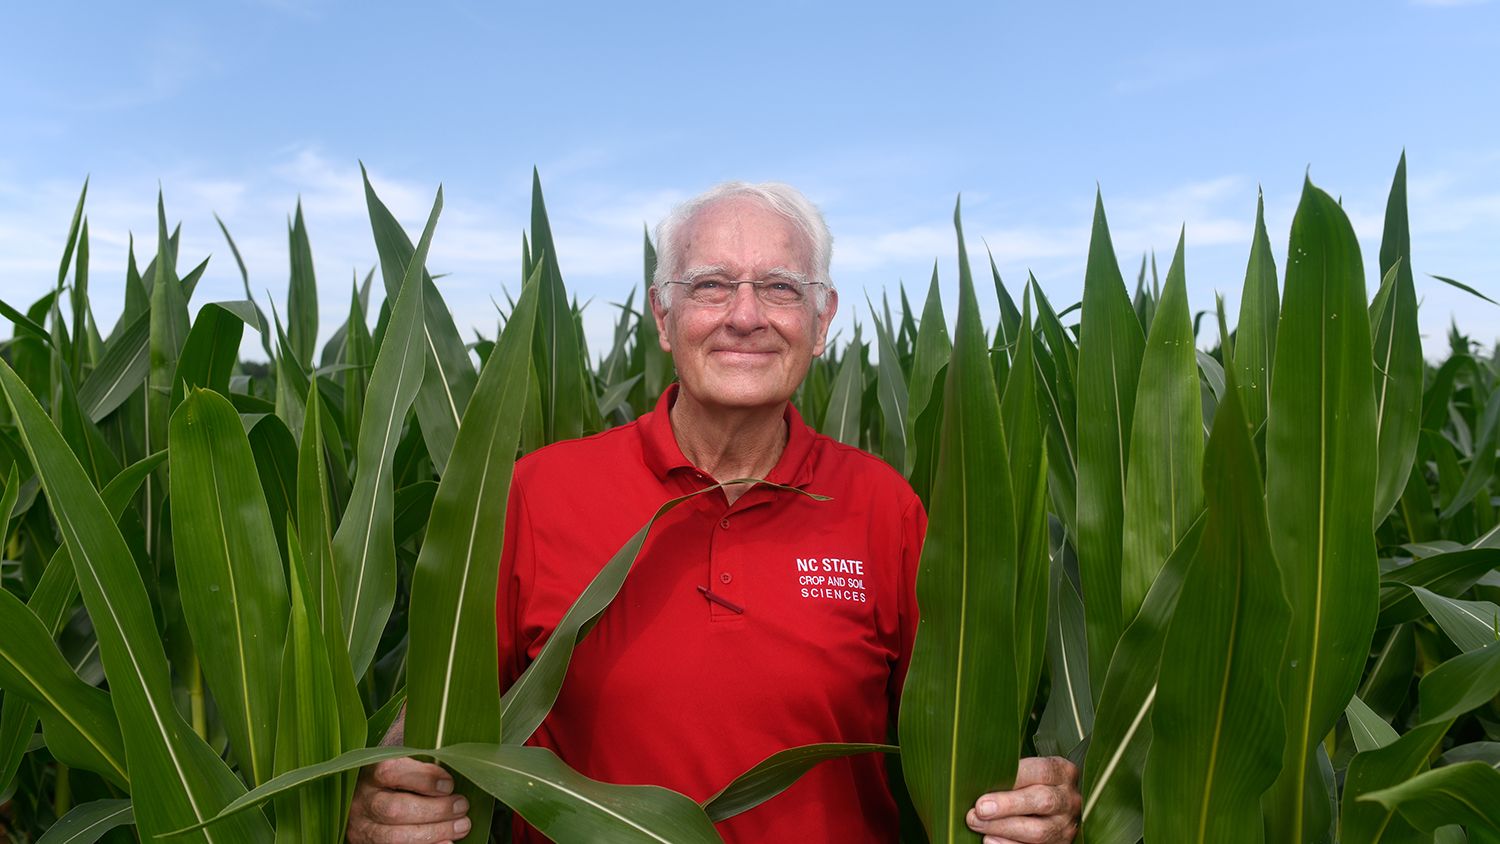 NC State CALS Professor Bob Patterson 50 years